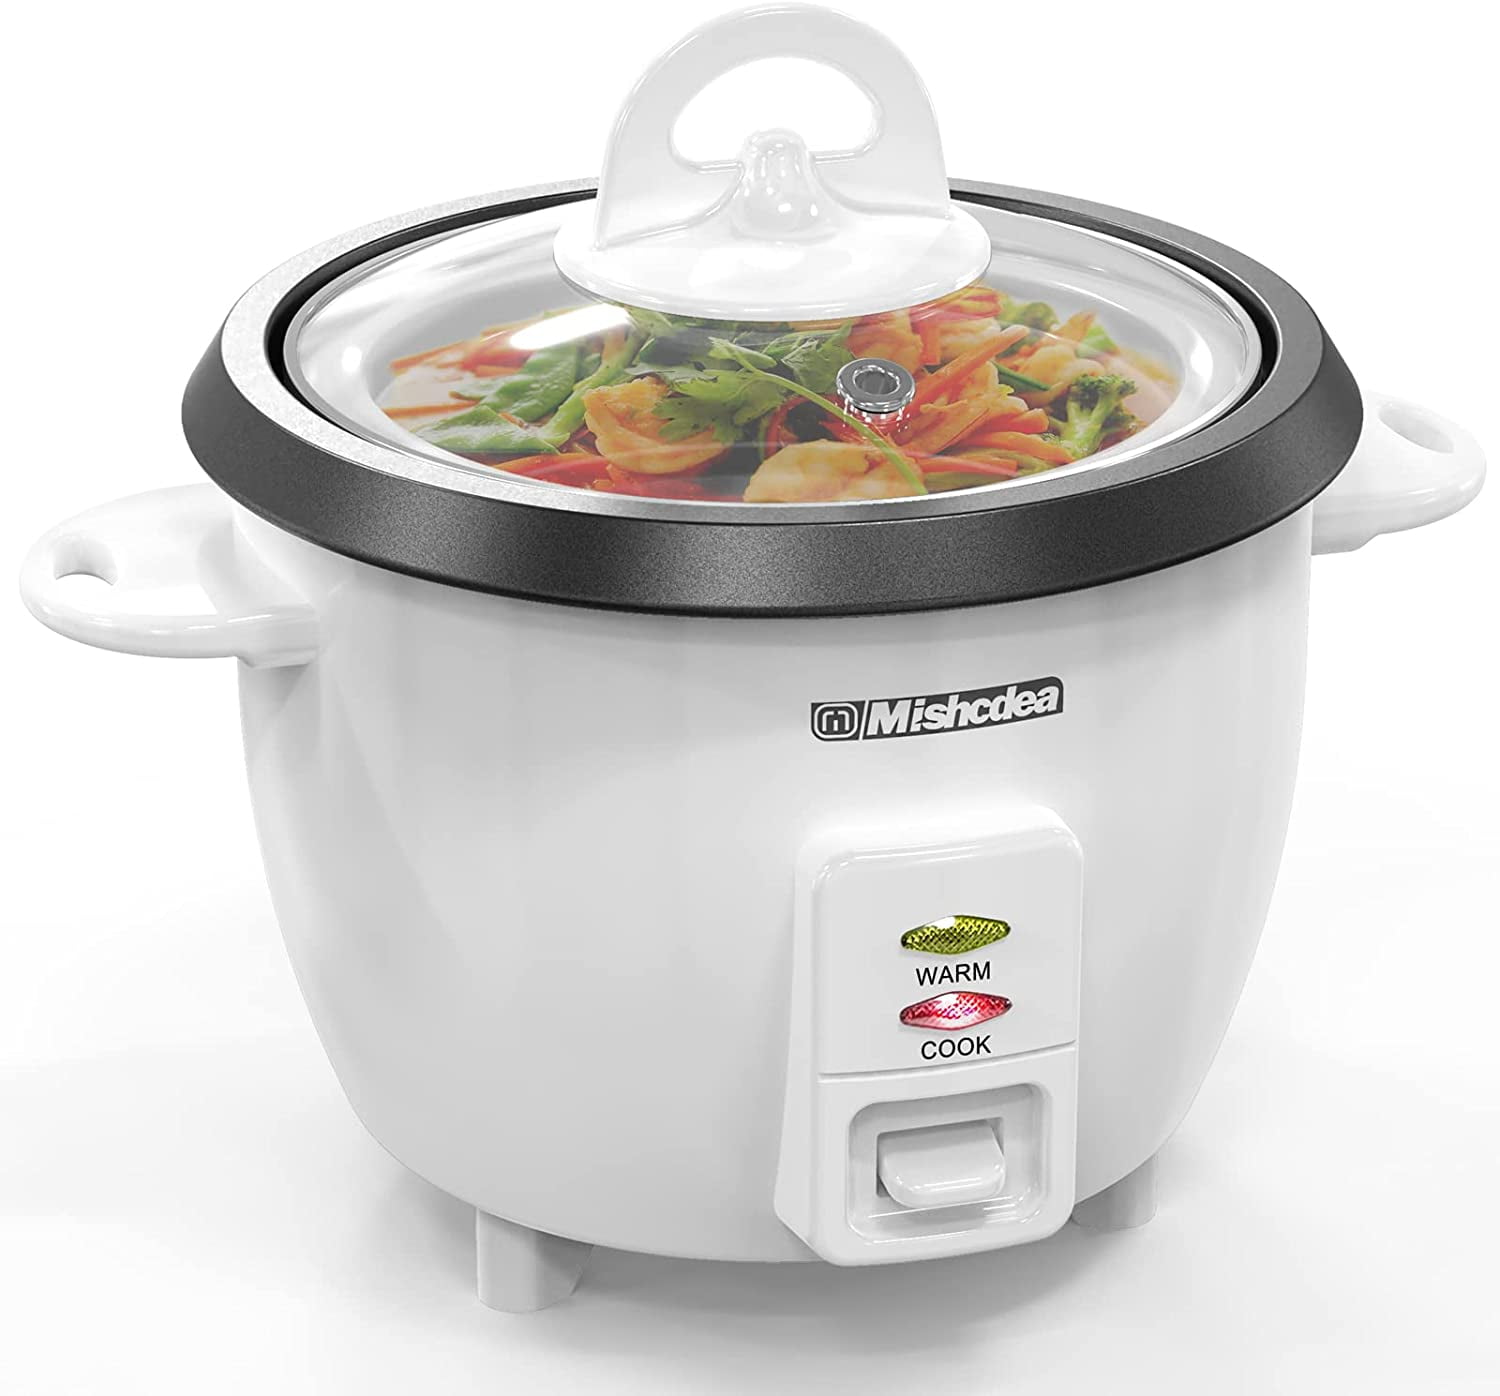 Mishcdea Rice Cooker 5 Cups Uncooked (10 Cooked) & Steam Tray